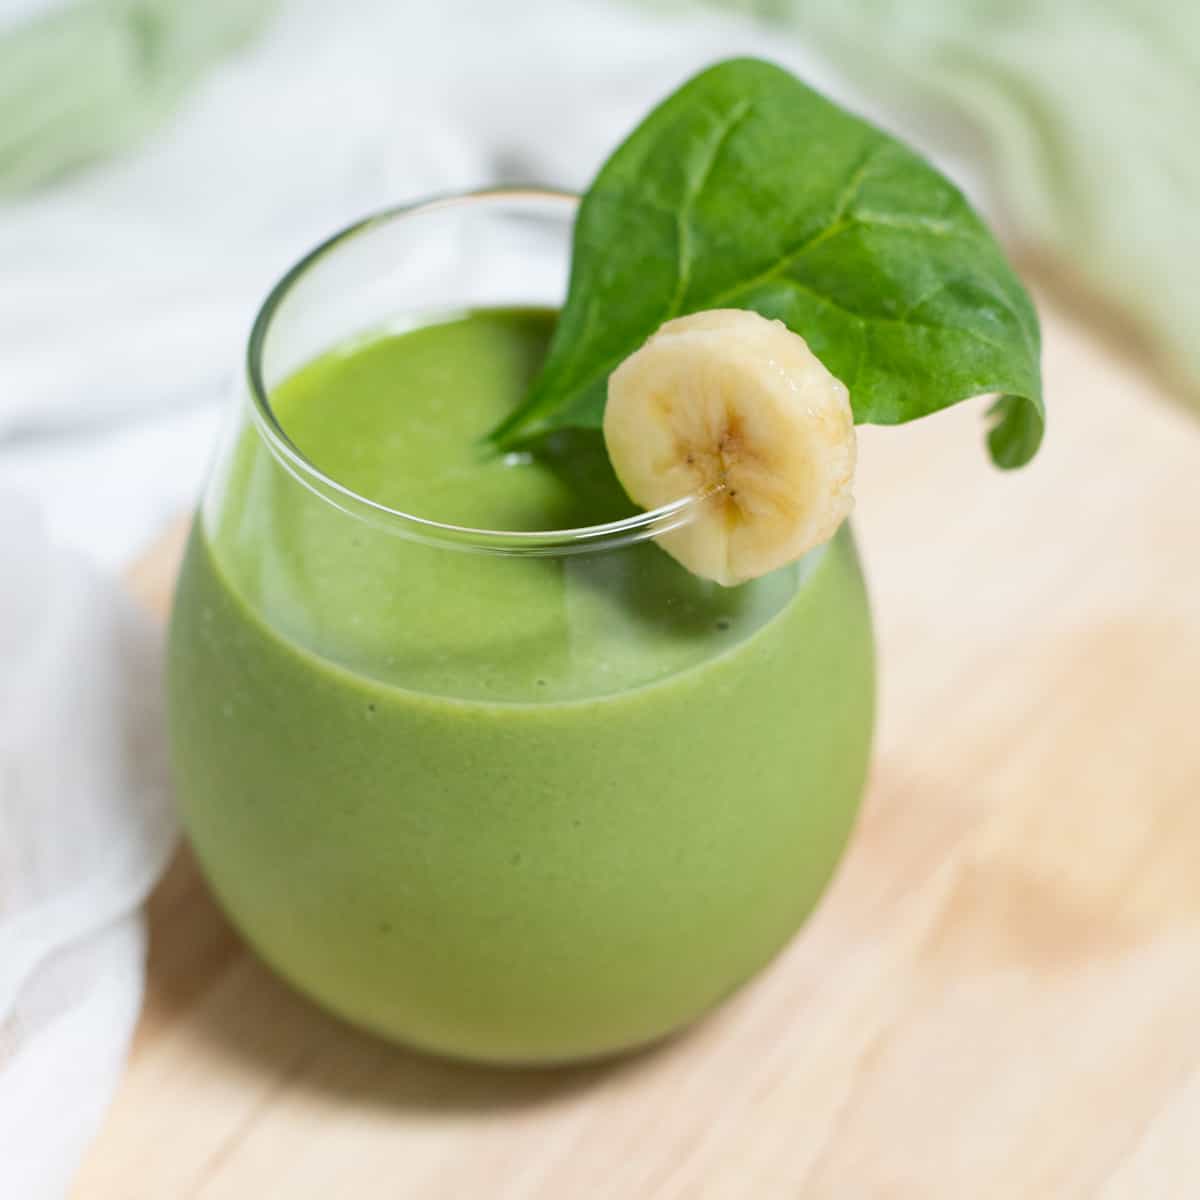 Banana spinach smoothie in glass.